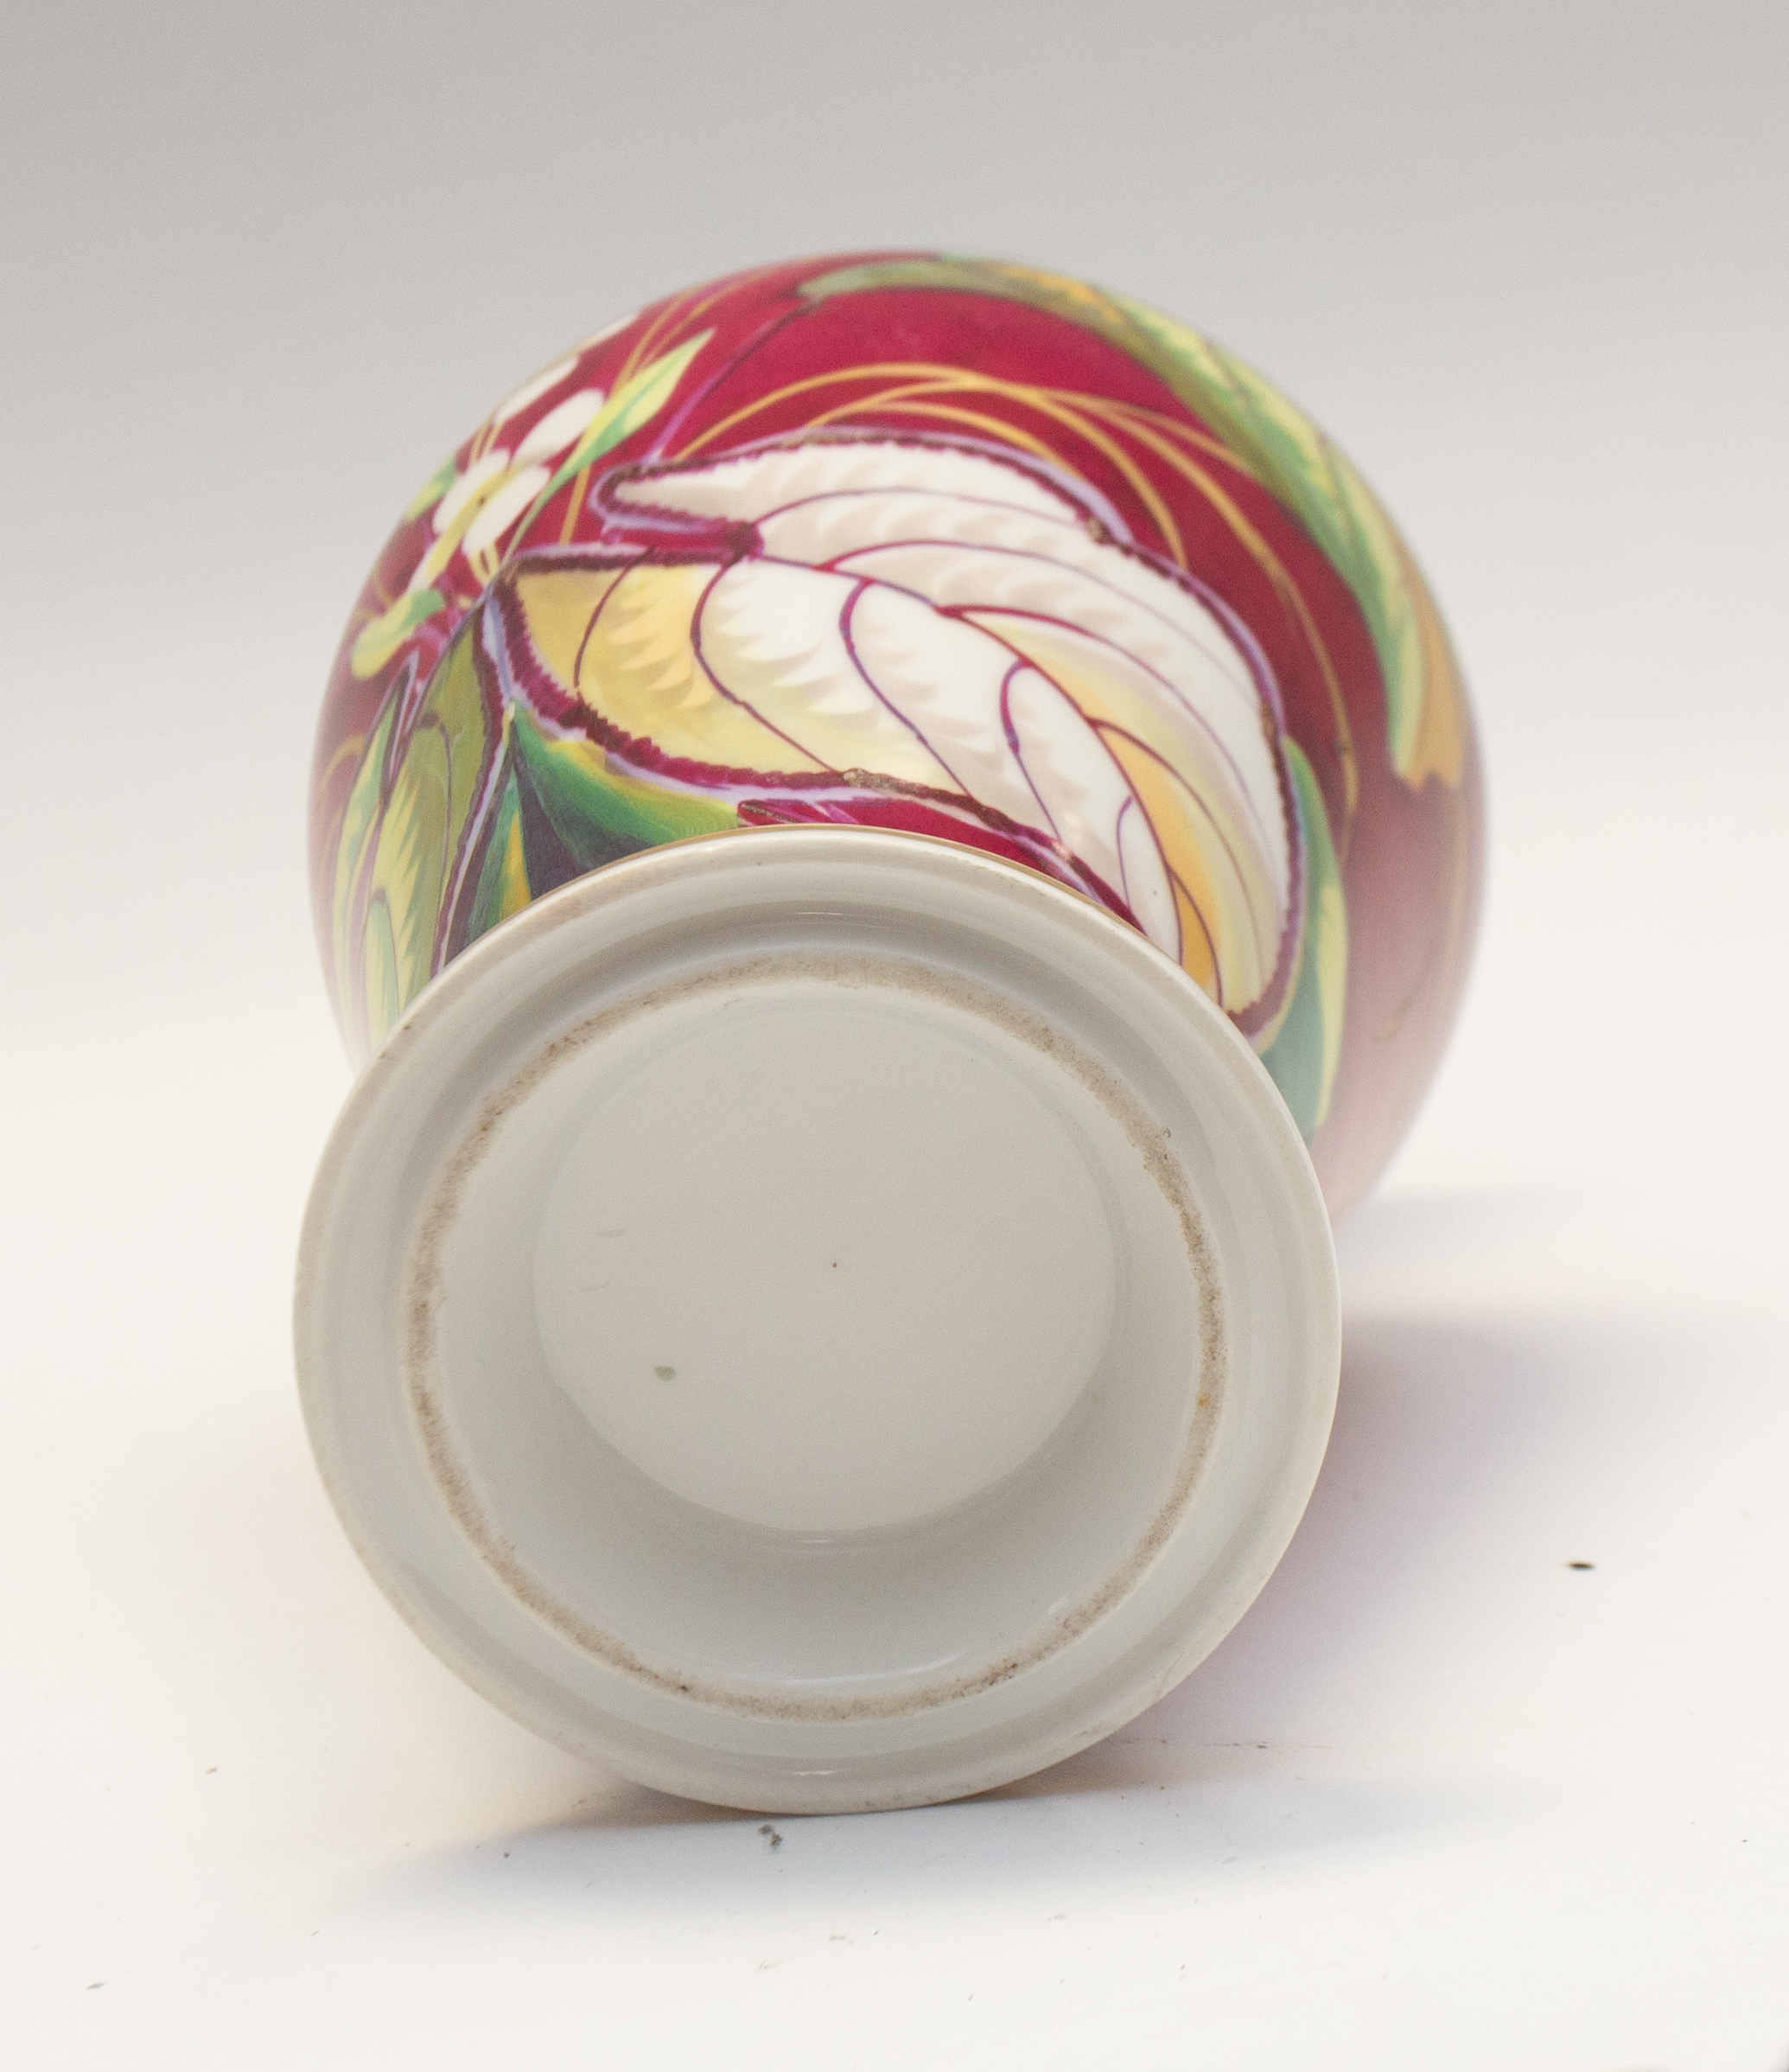 Late 19th century/ early 20th century single continental porcelain vase with foliage detail - Image 2 of 3